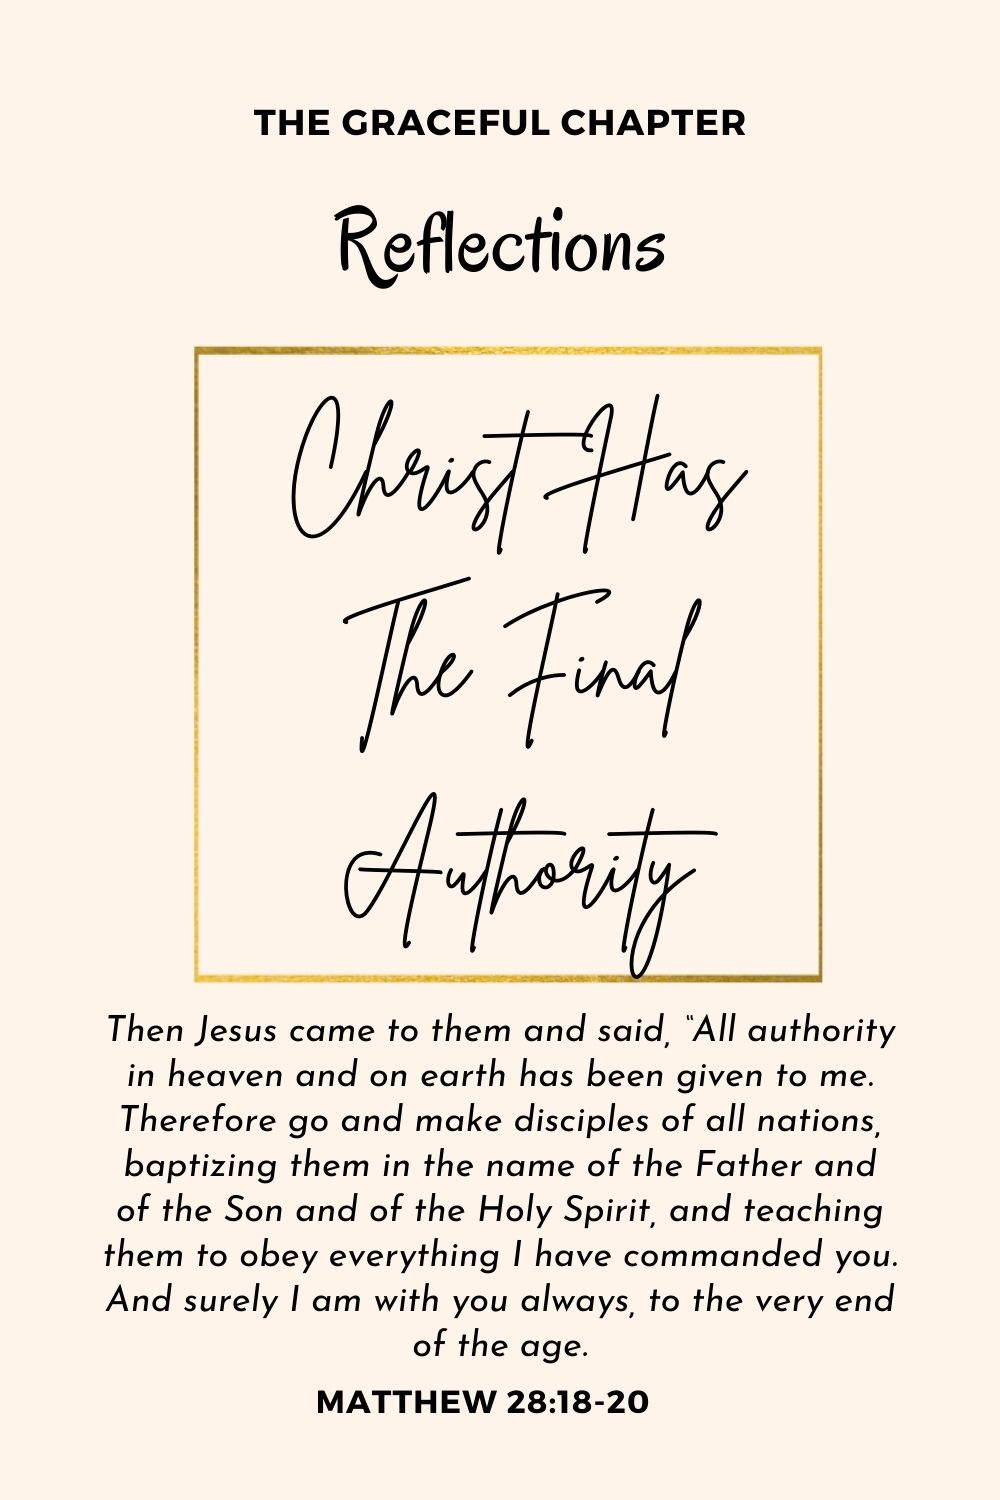 Reflection - Matthew 28:18-20 - Christ Has The Final Authority